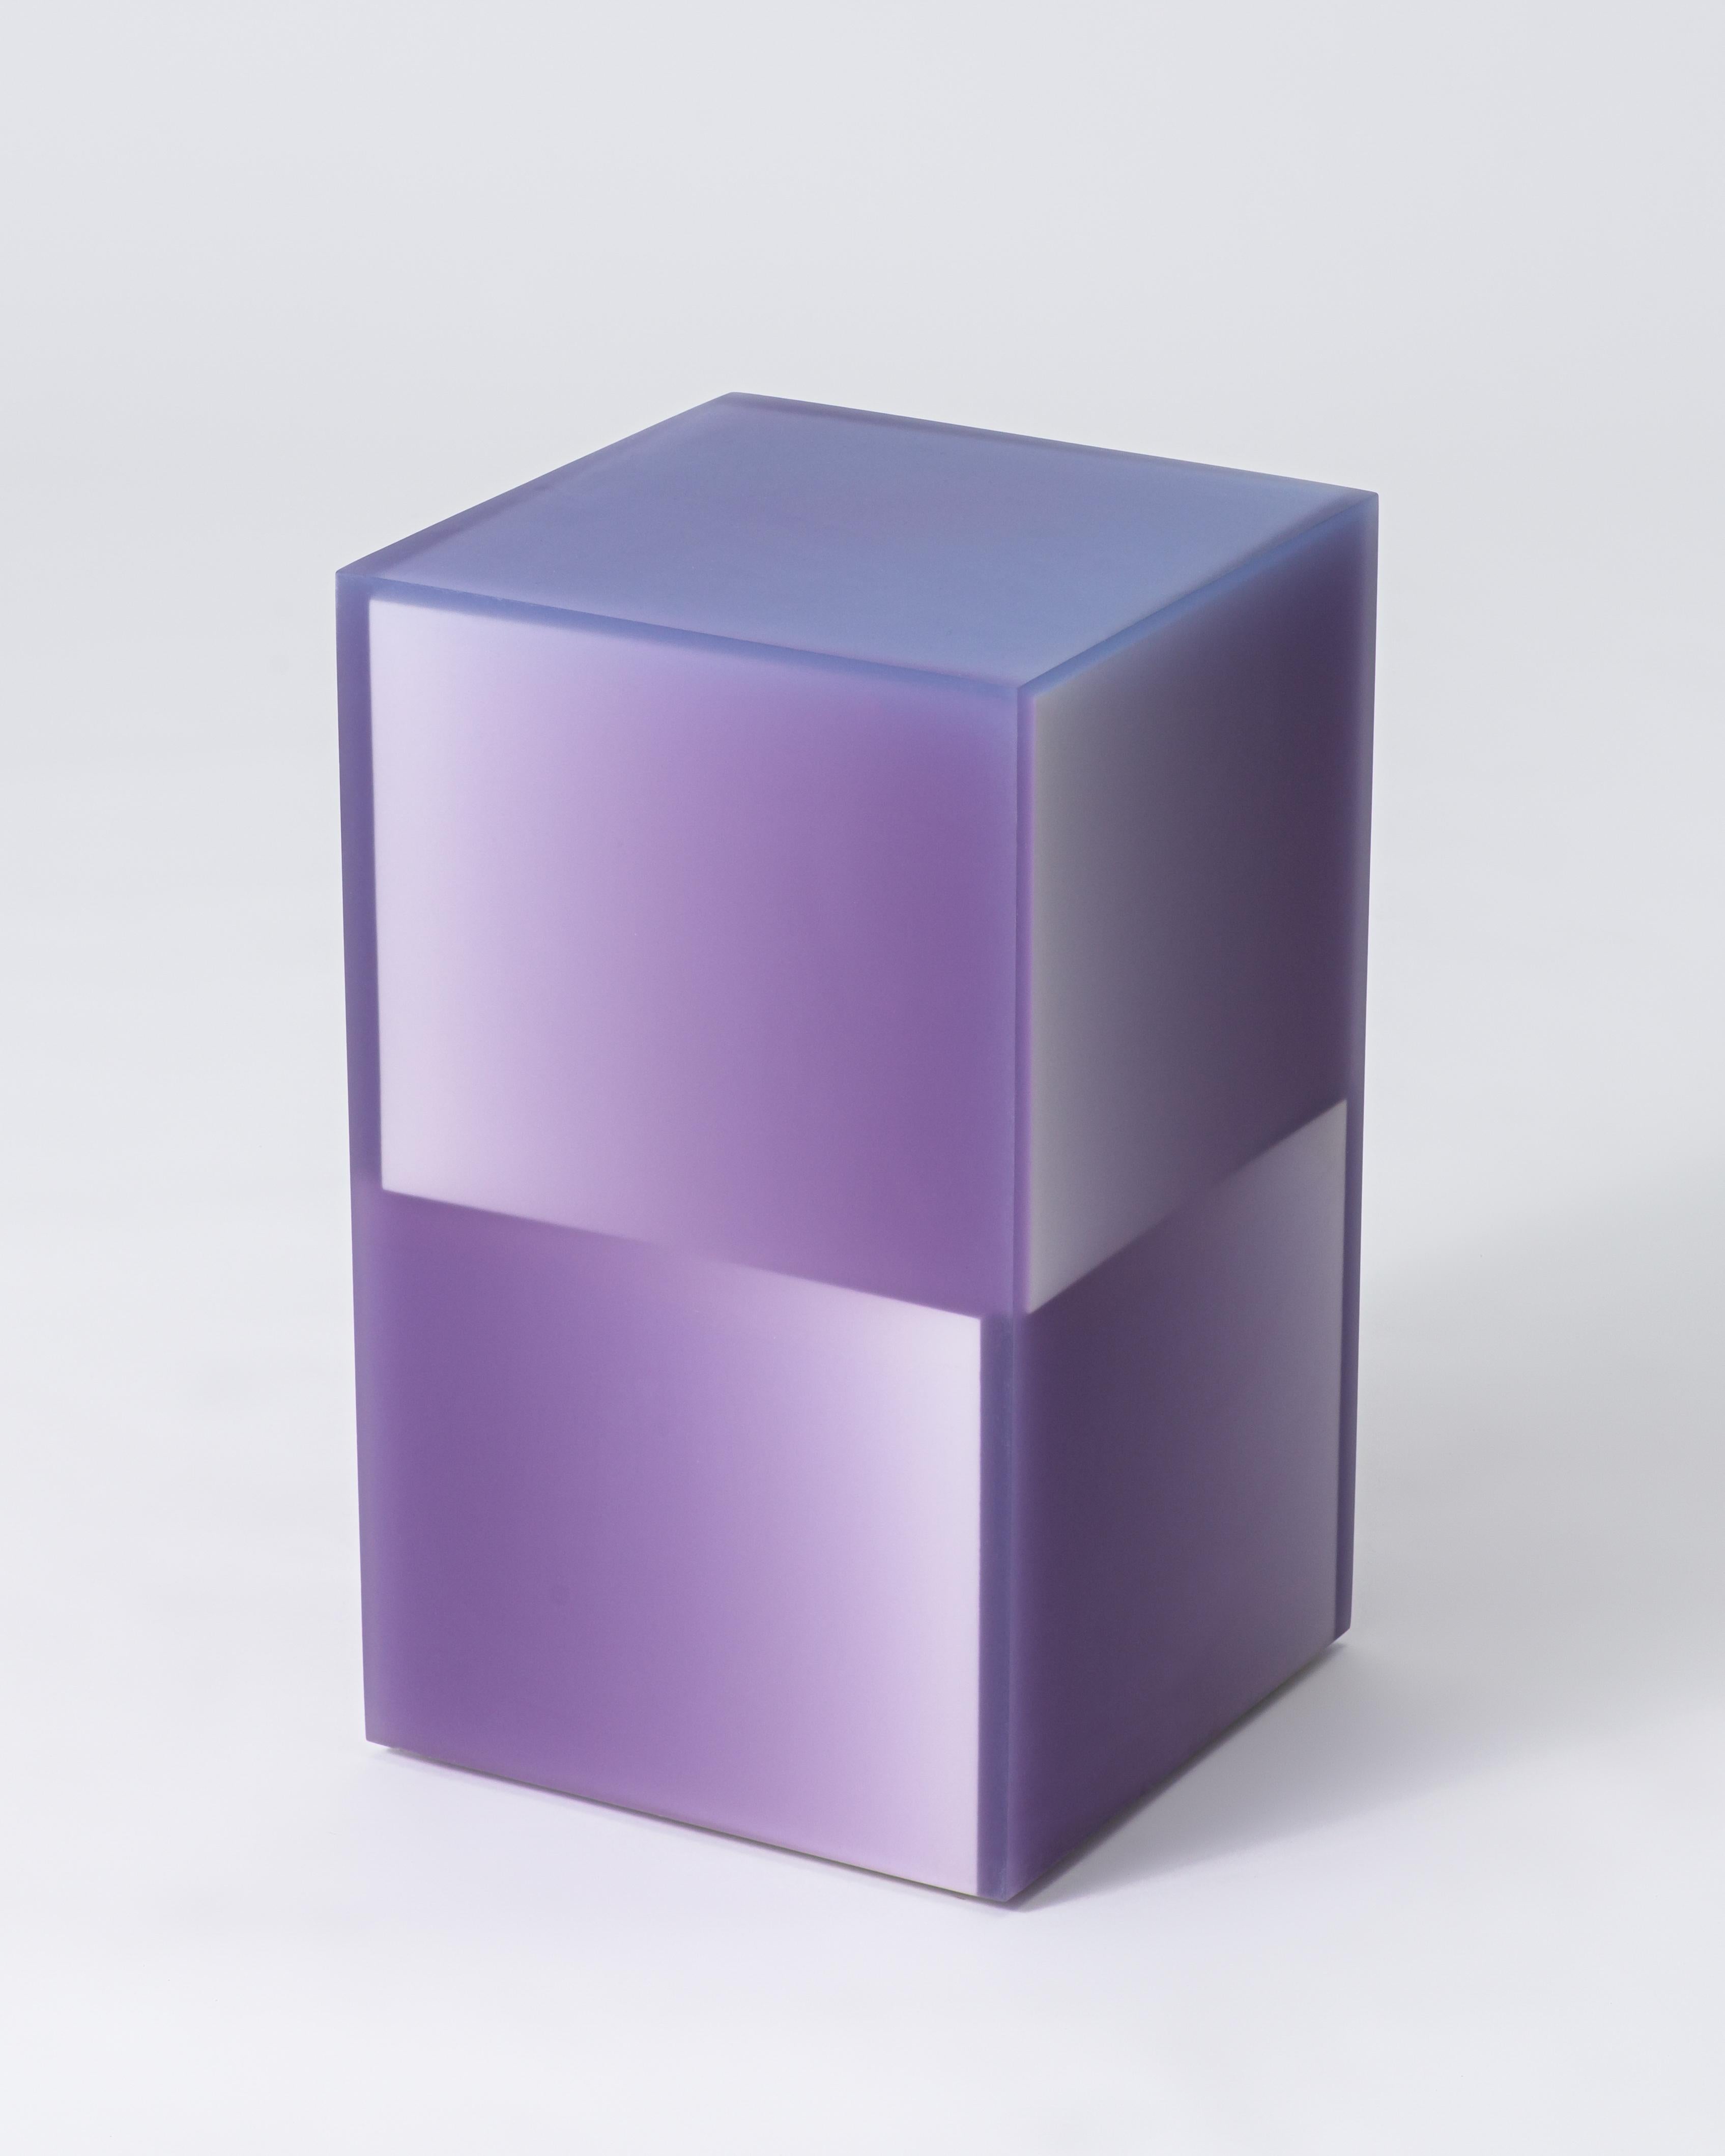 This playful multi-layered side table with a stacked cube design is available in different gradients of five primary colors. Created with a medley of gradual saturation shifts in opposing directions, the combination of core and resin color